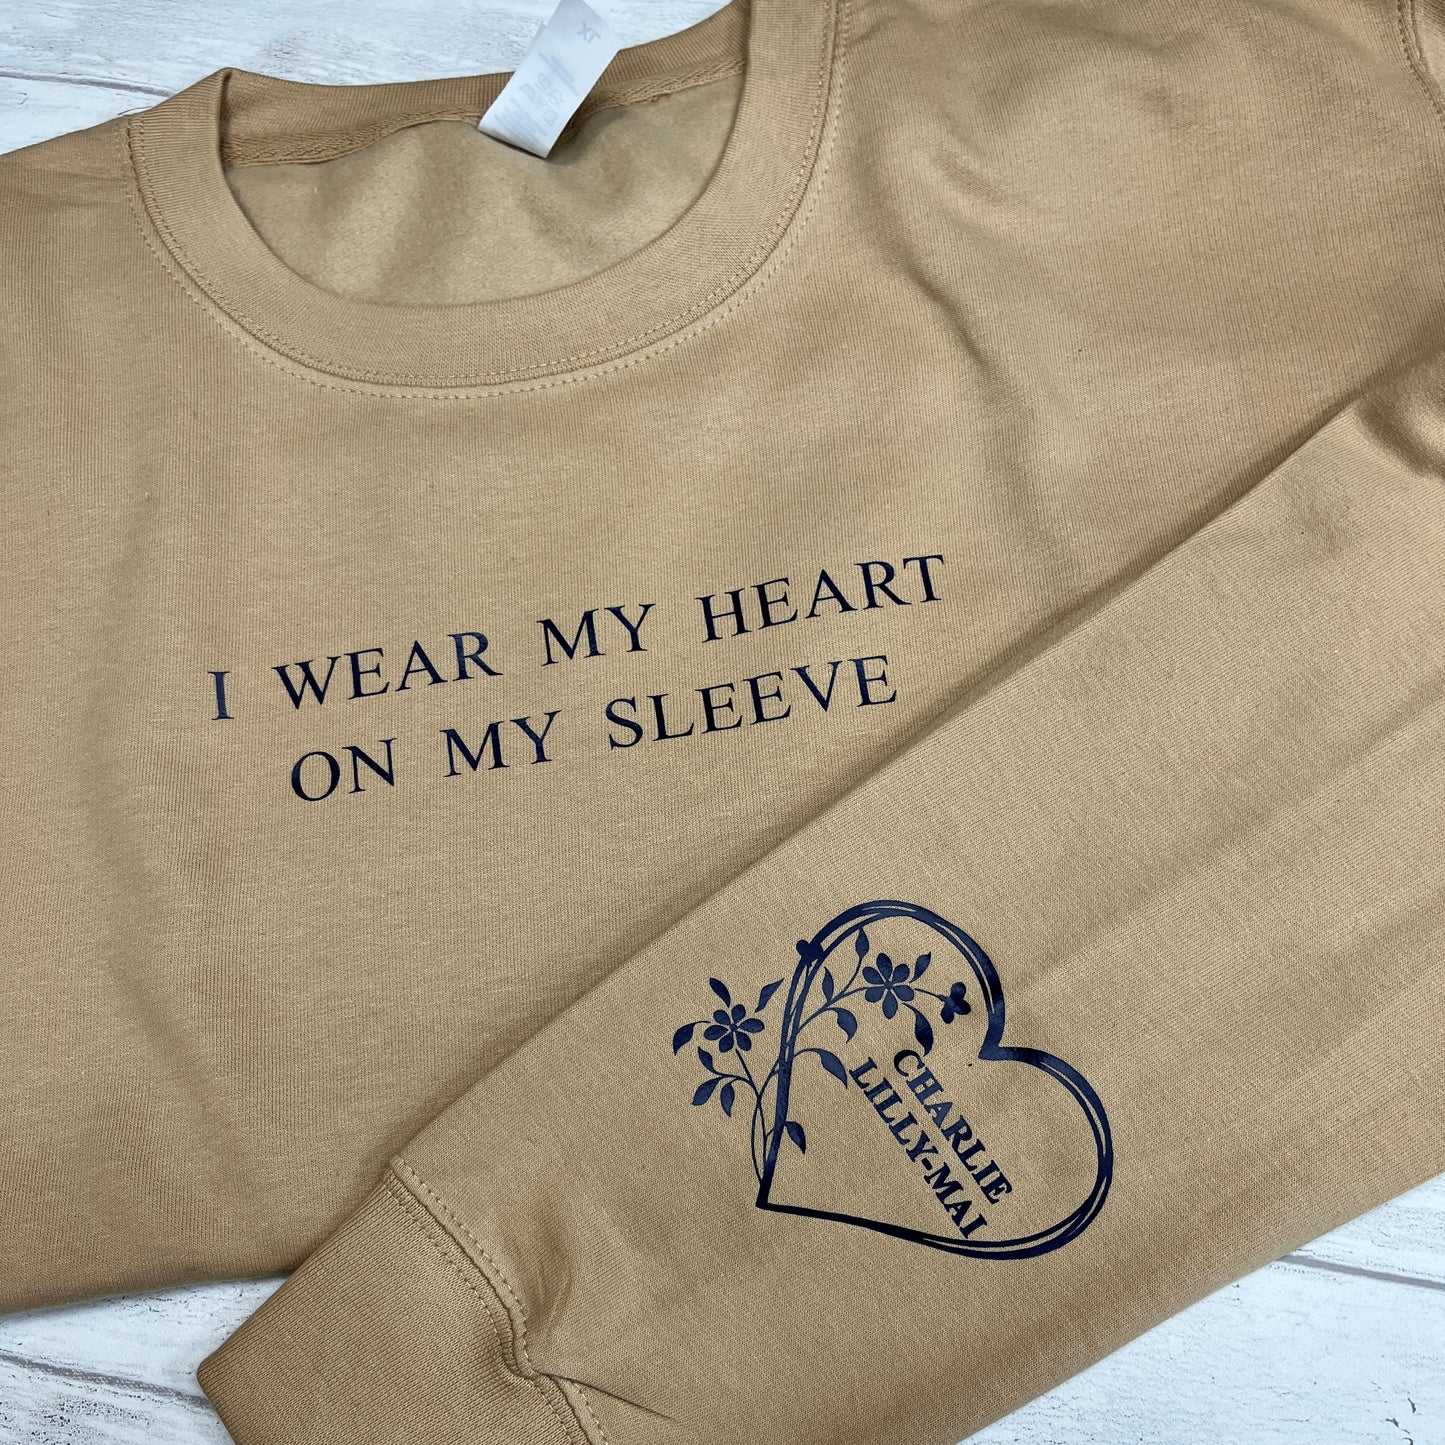 Personalised I wear my heart on my sleeve Jumper/Sweatshirt, Kids name on sleeve, Gift for Mums